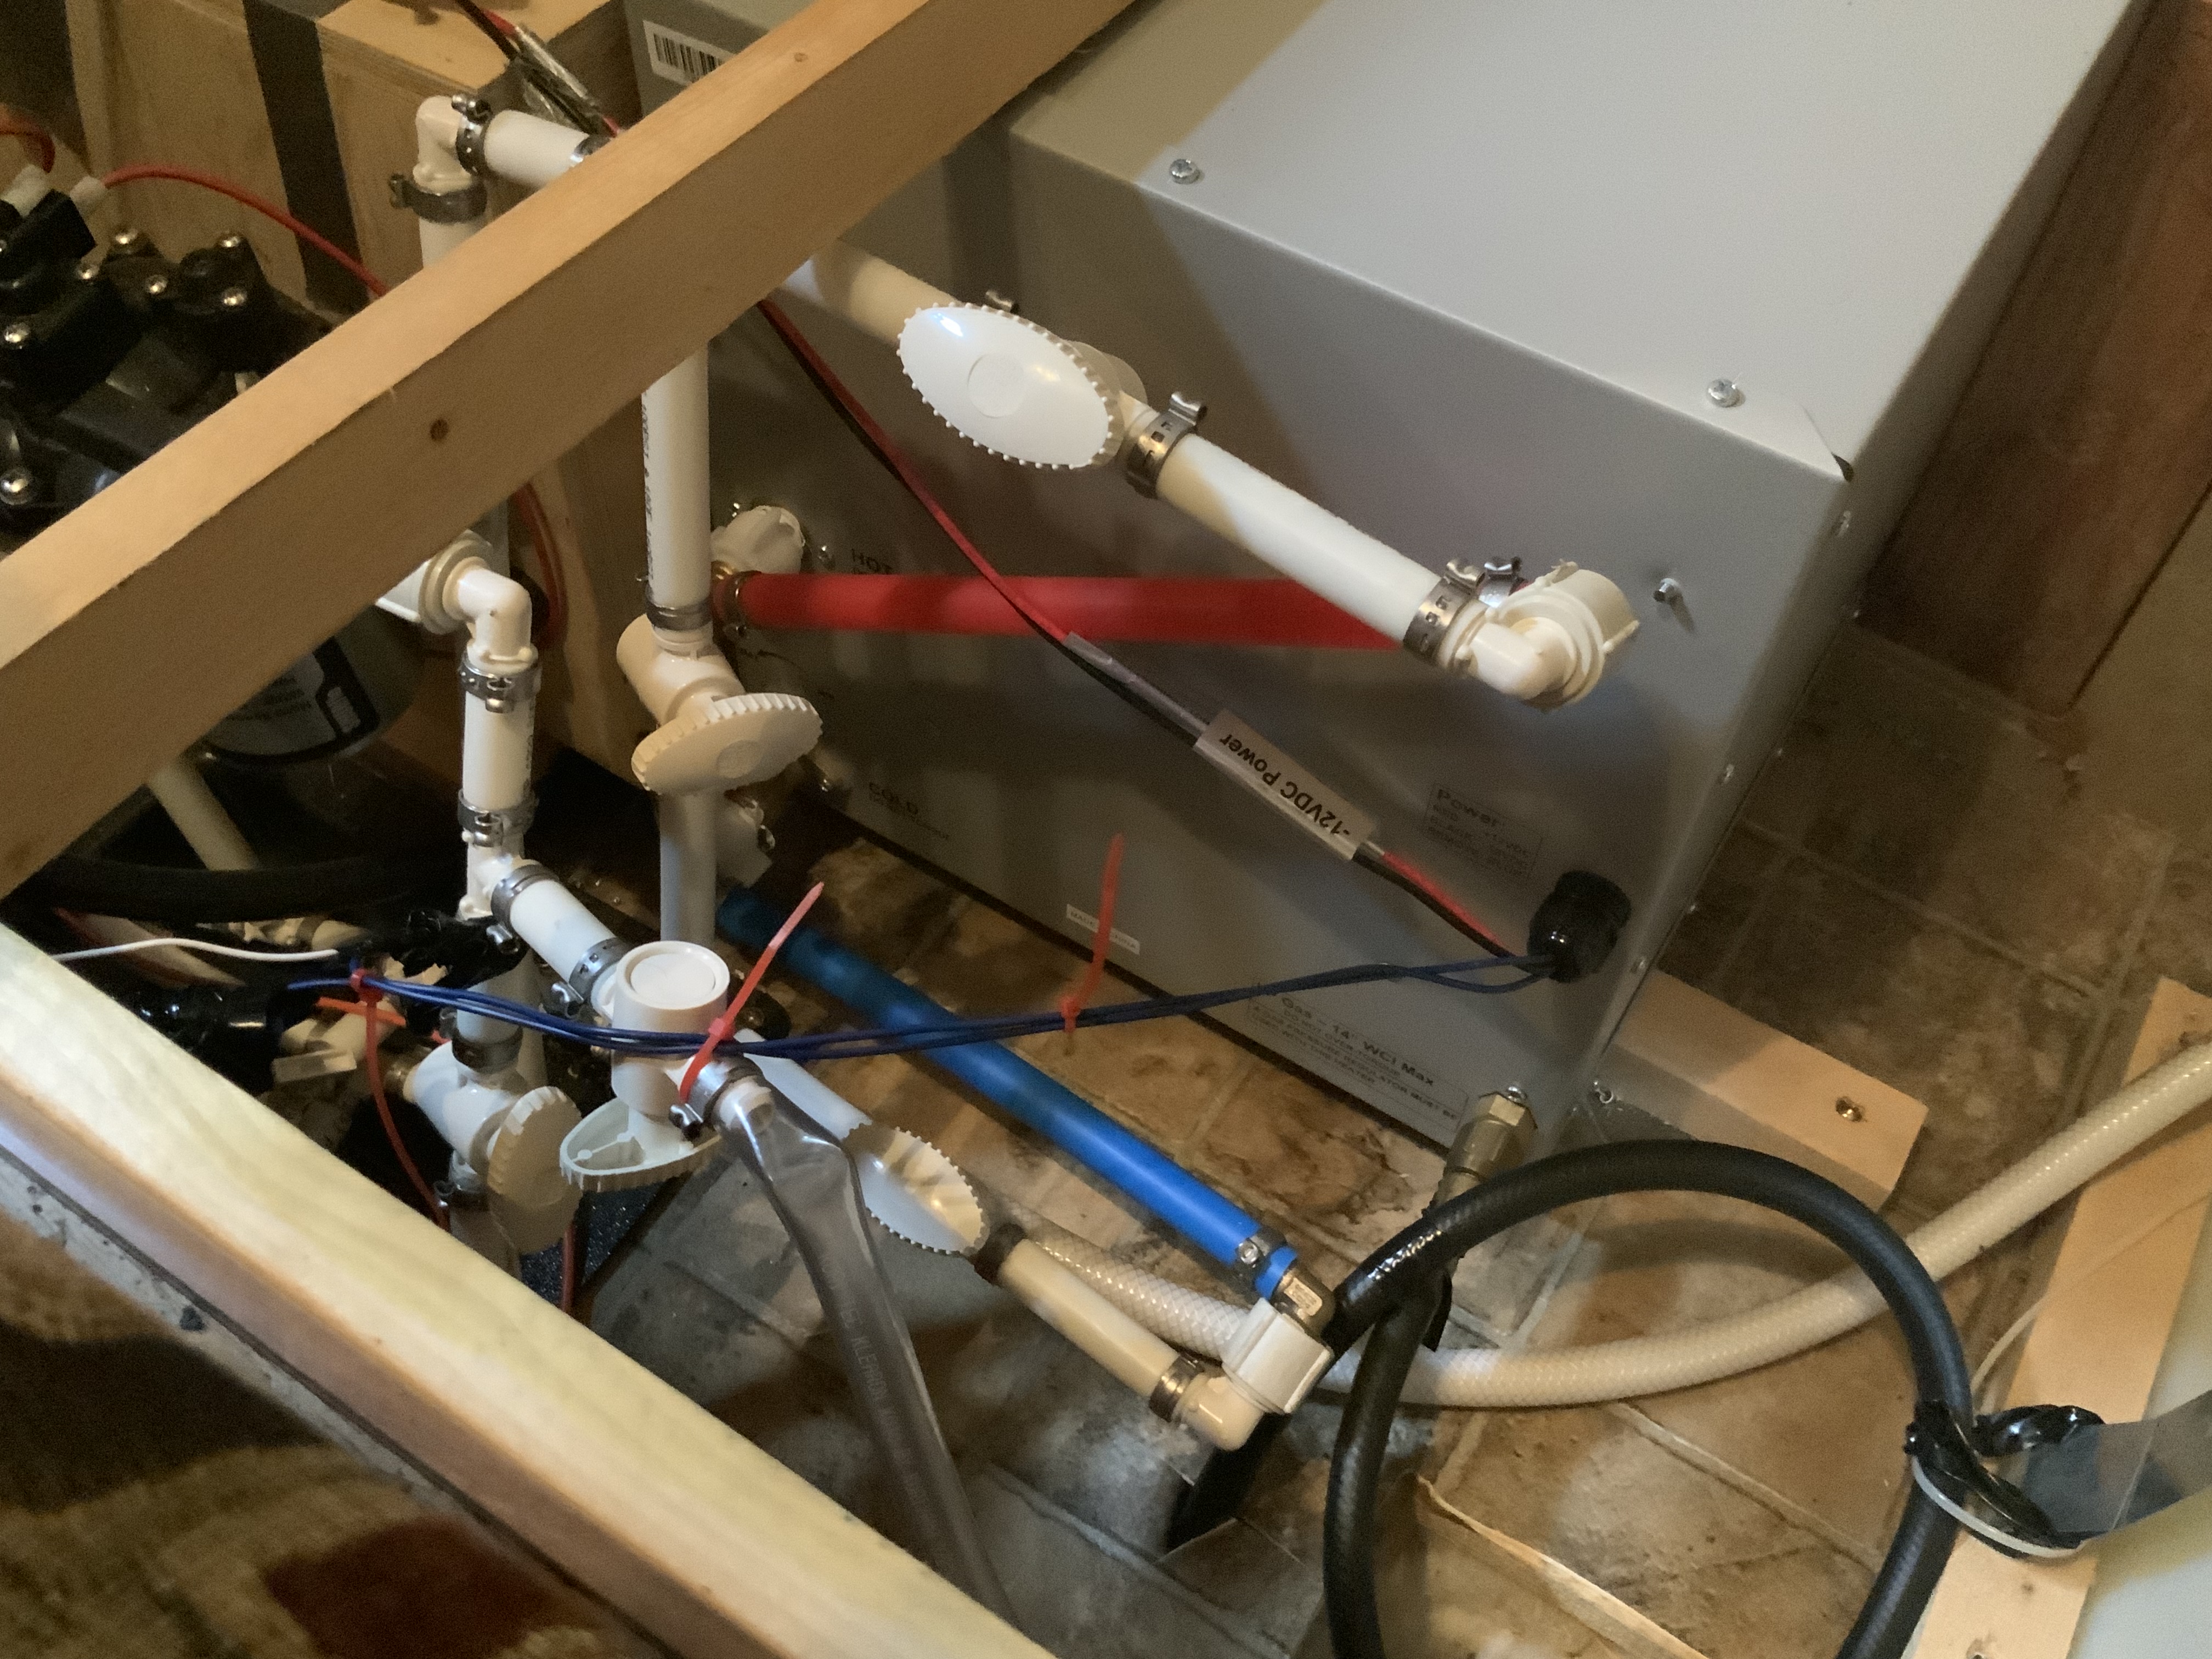 Used Pex plumbing to connect heater to existing water supply lines.